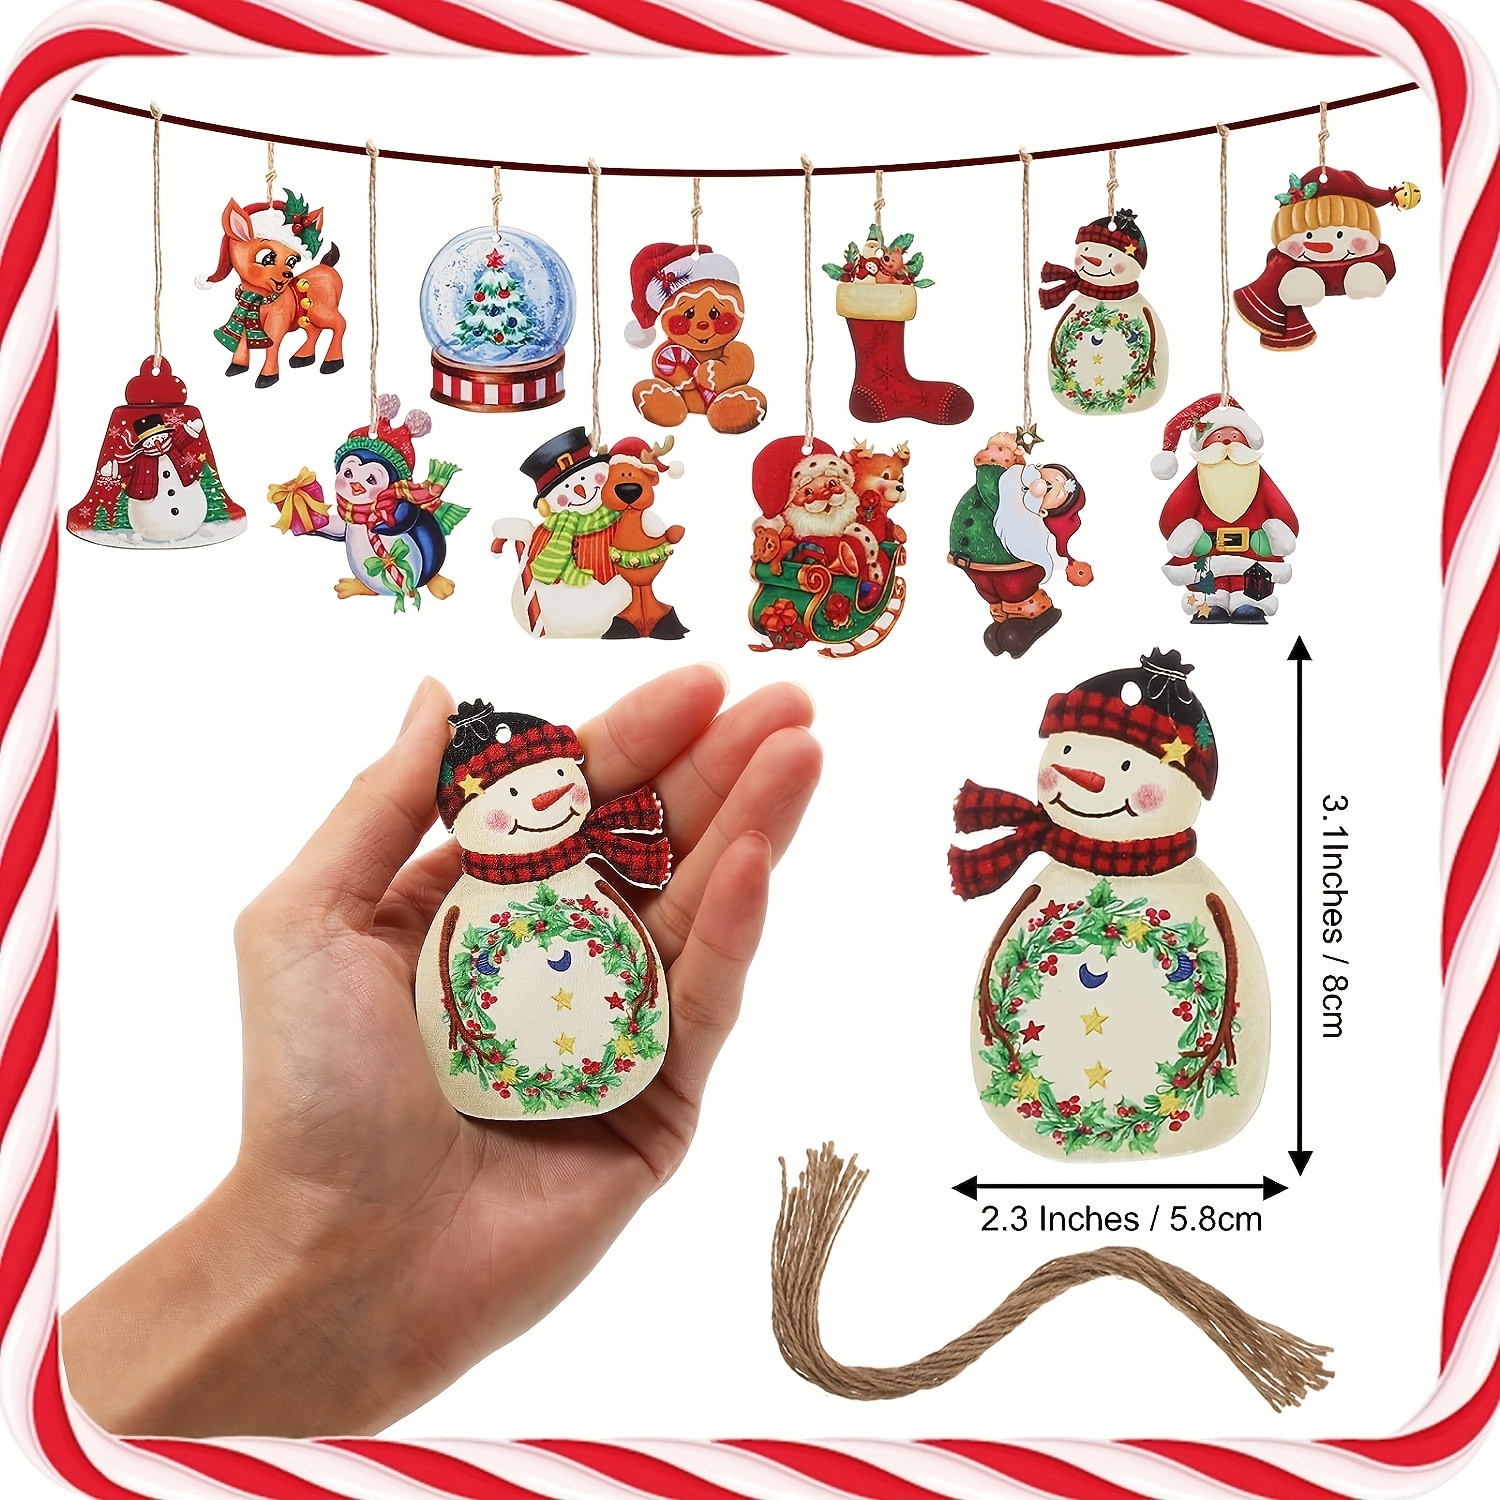 24pcs christmas wooden ornaments christmas wood decor farmhouse style hanging wooden ornaments christmas tree vintage santa snowman ornaments christmas hanging crafts pendants for home party 2